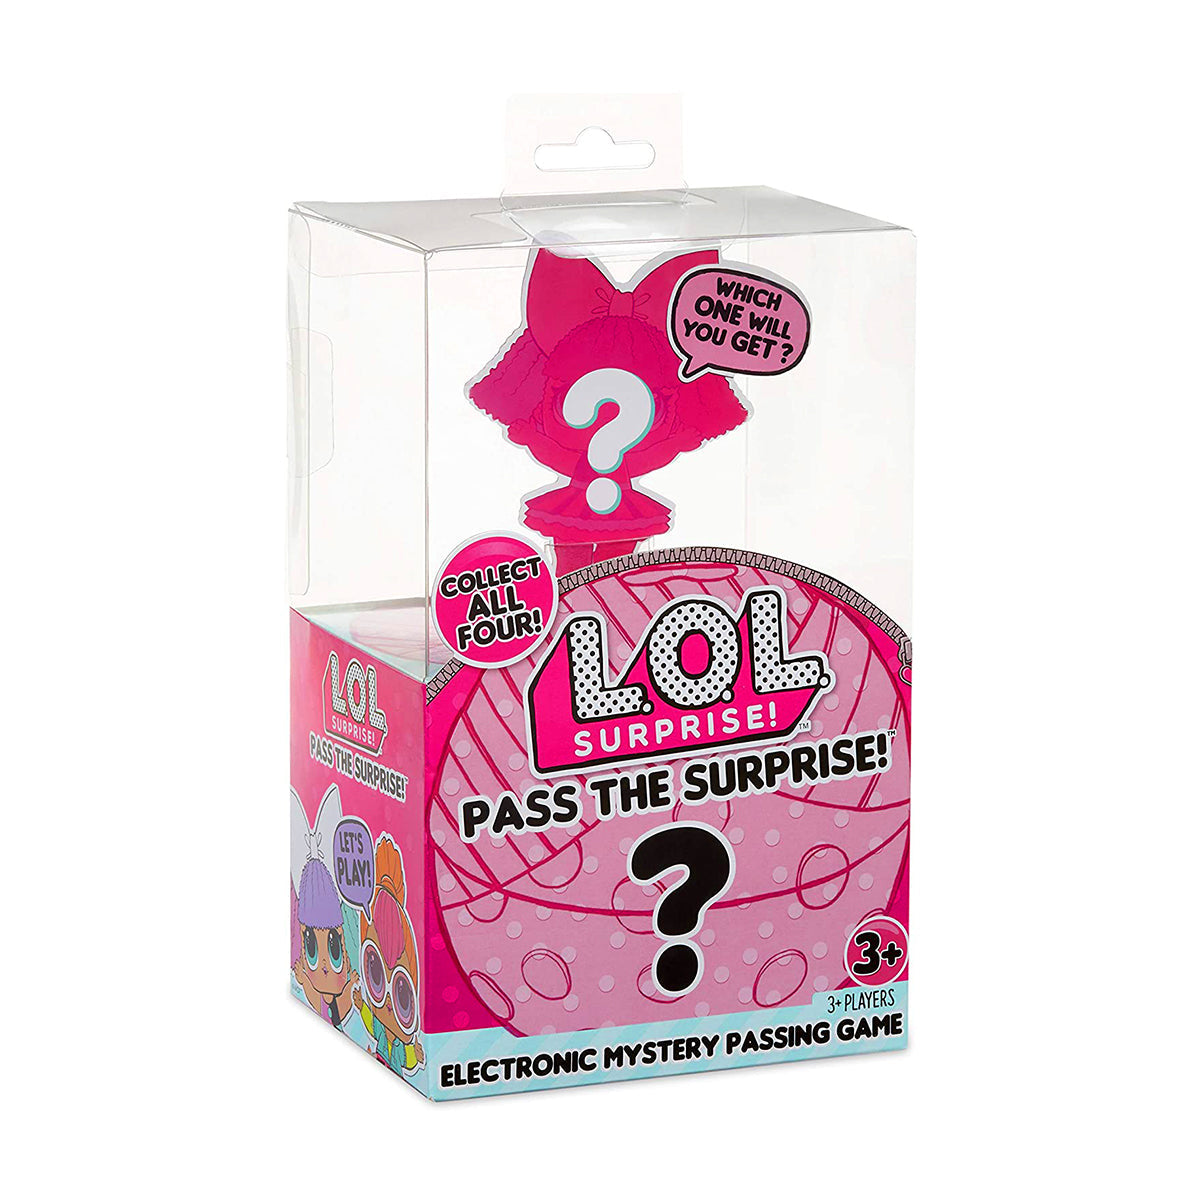 L.O.L. Surprise - Pass The Surprise Electronic Mystery Passing Game